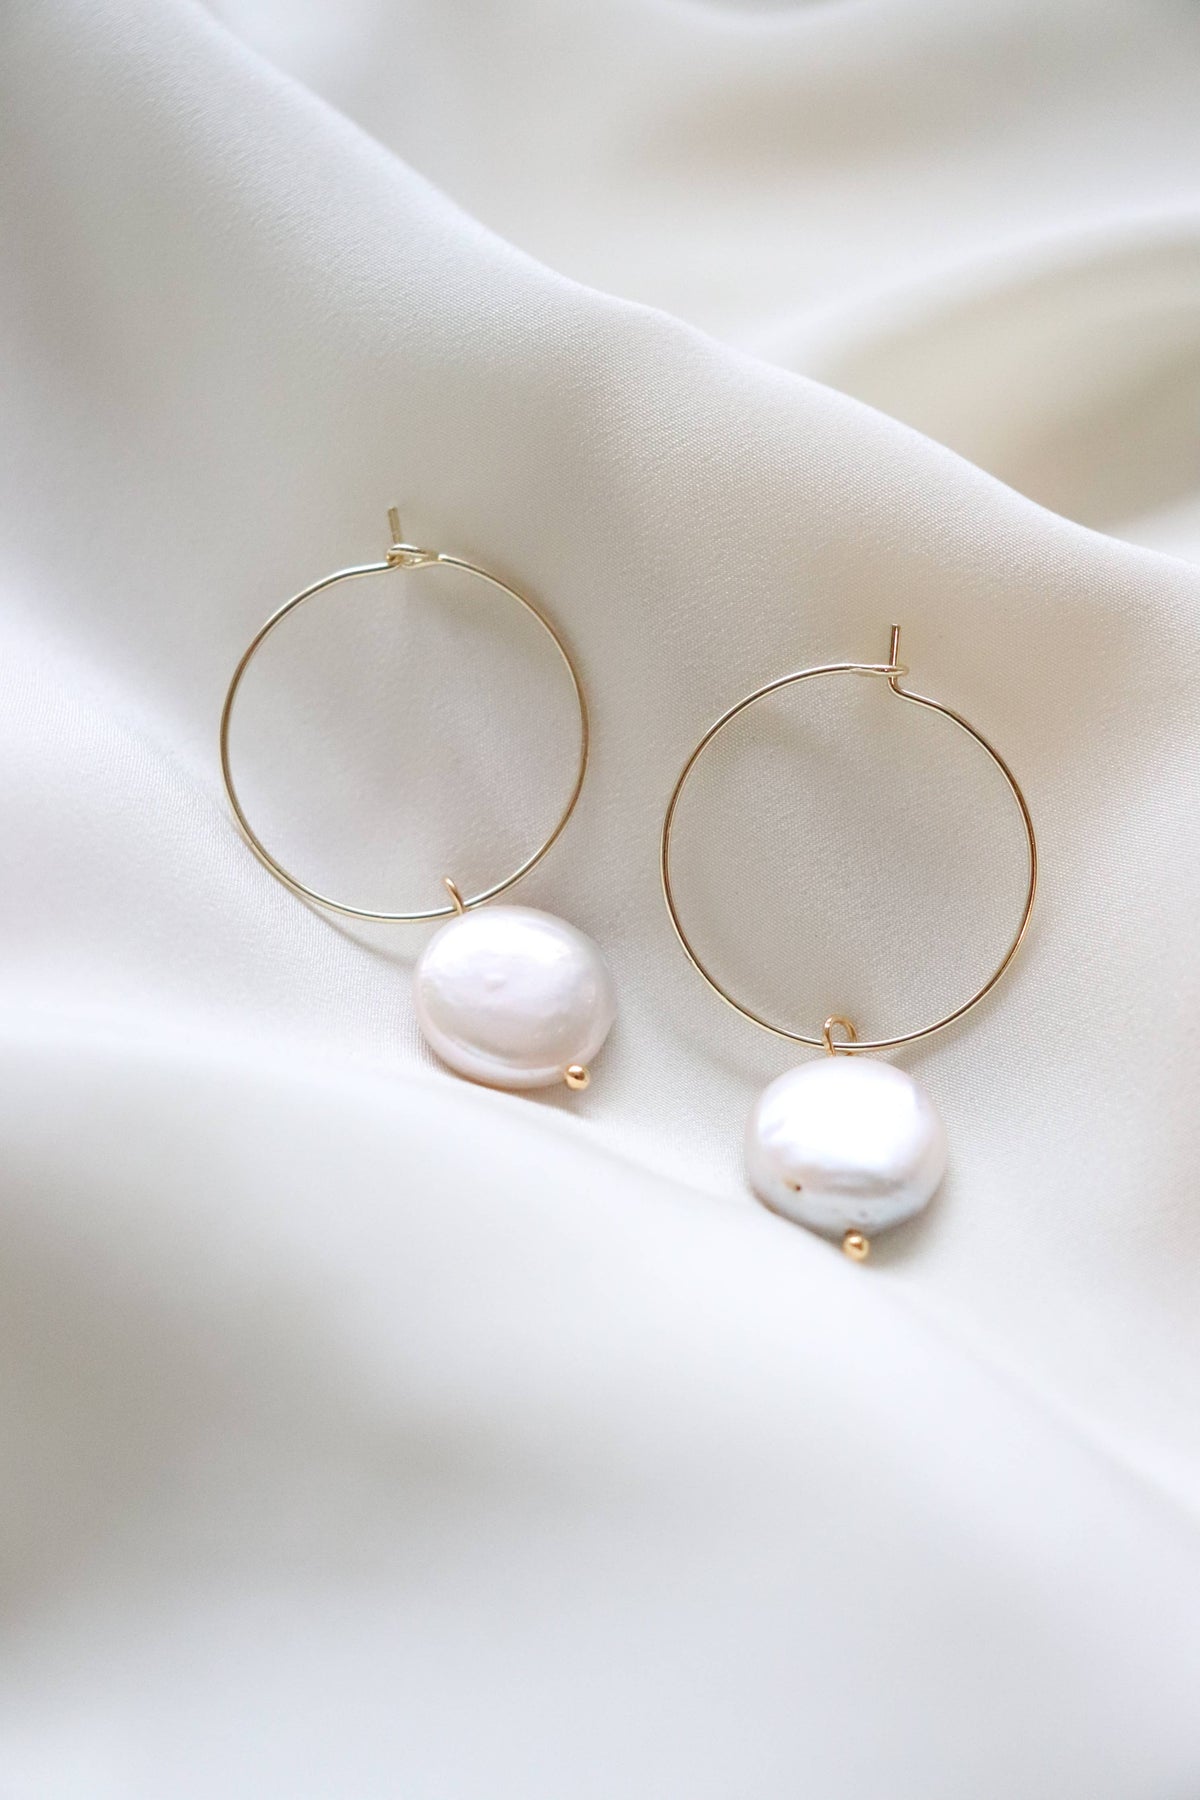 We are loving these pearl hoop earrings. 18K gold plated hoop with natural pearl accent.